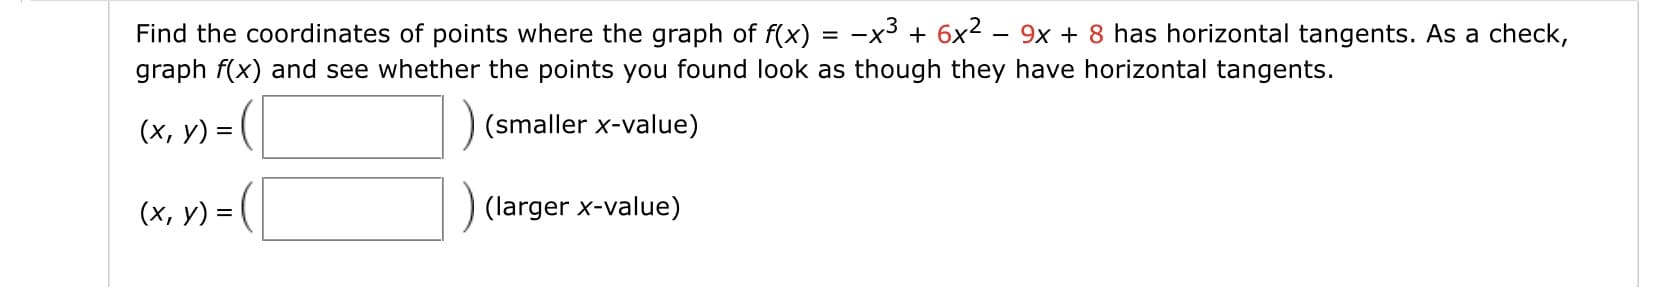 Find the coordinates of points where the graph of f(x) = -x³ + 6x2 – 9x + 8 has horizontal tangents. As a check,
graph f(x) and see whether the points you found look as though they have horizontal tangents.
(x, y) = (
(smaller x-value)
(x, y) = (
(larger x-value)
